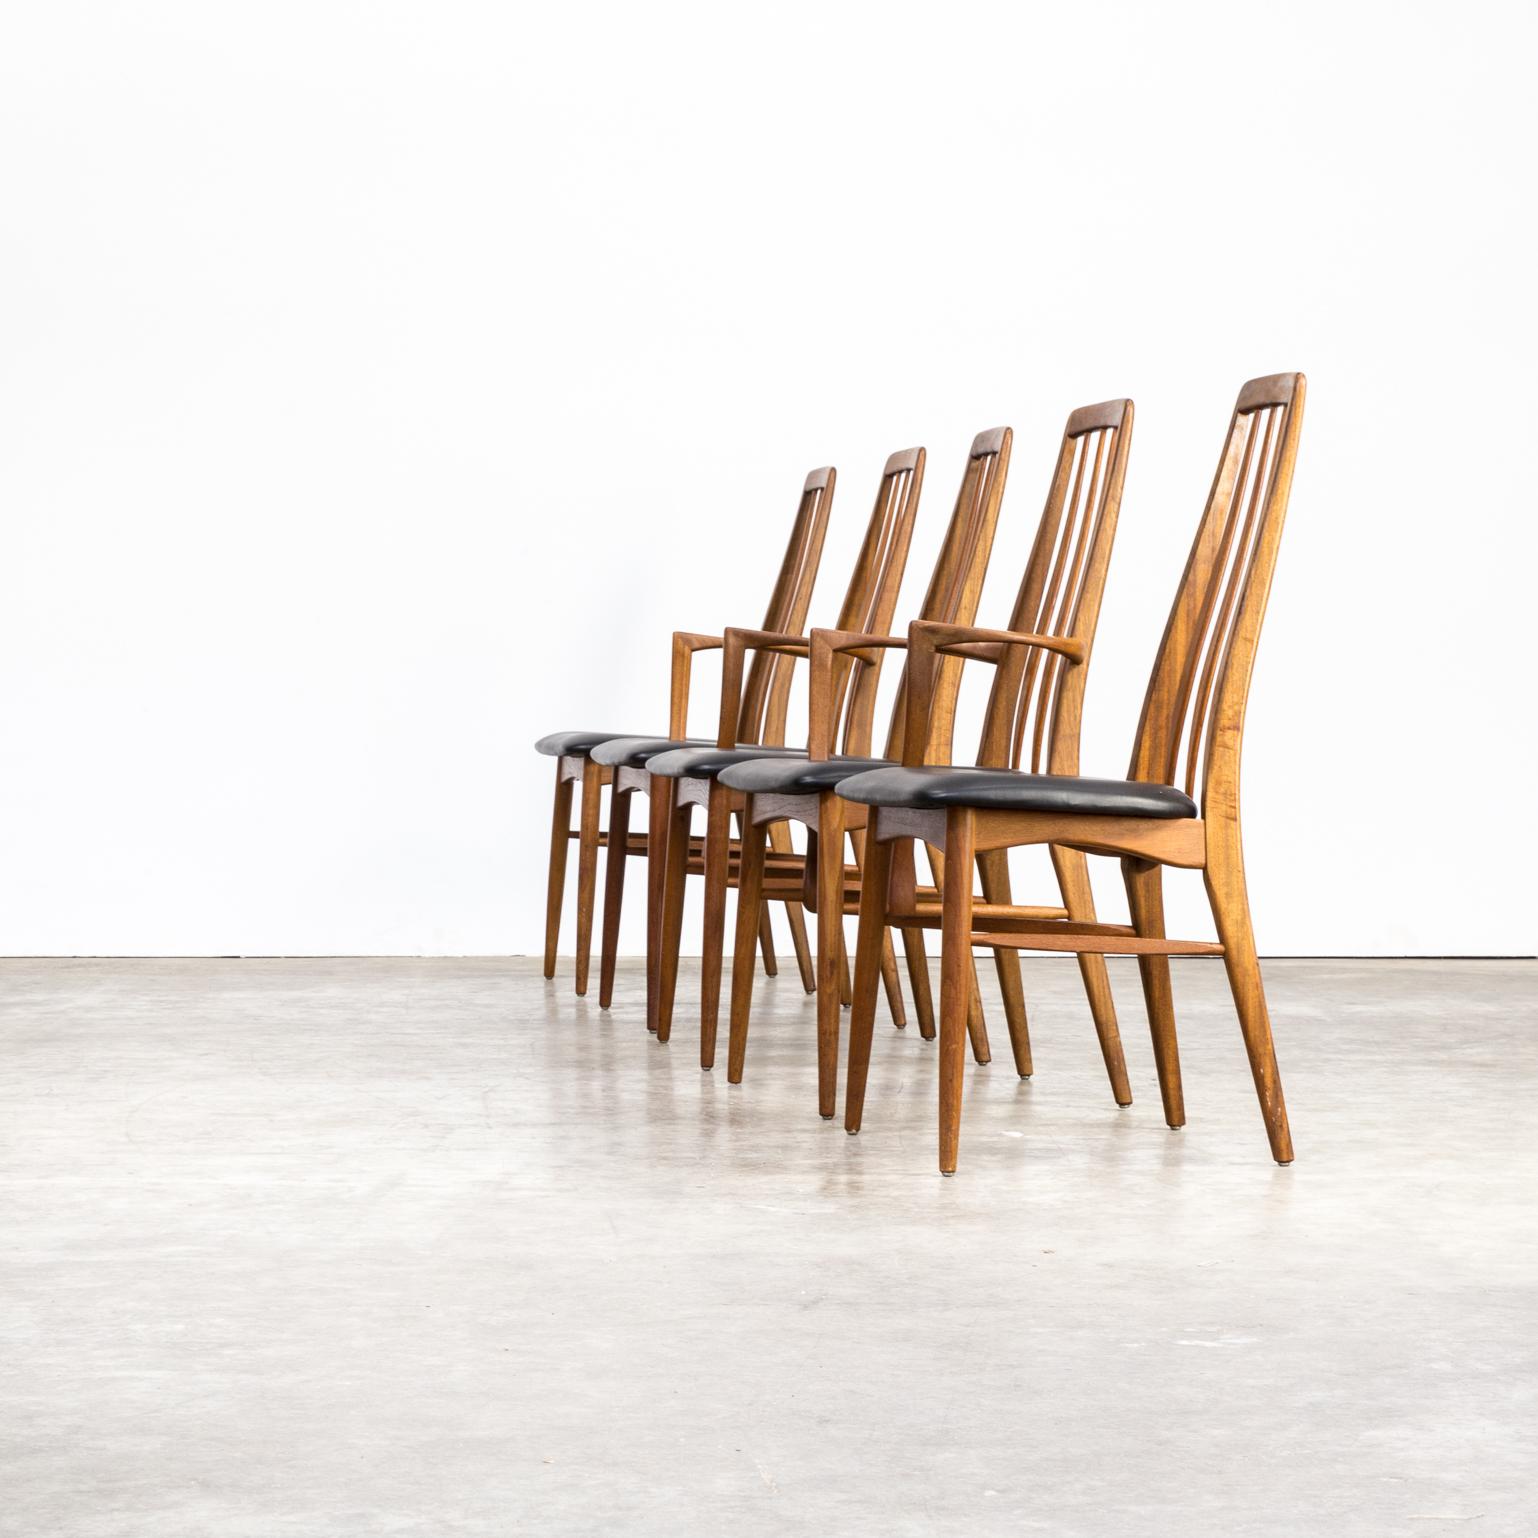 60s Niels Koefoed ‘eva’ dining chair for Koefoed Hornslet set/5. Good condition, consistent with age and use. Two chairs with armrests, three chairs without.